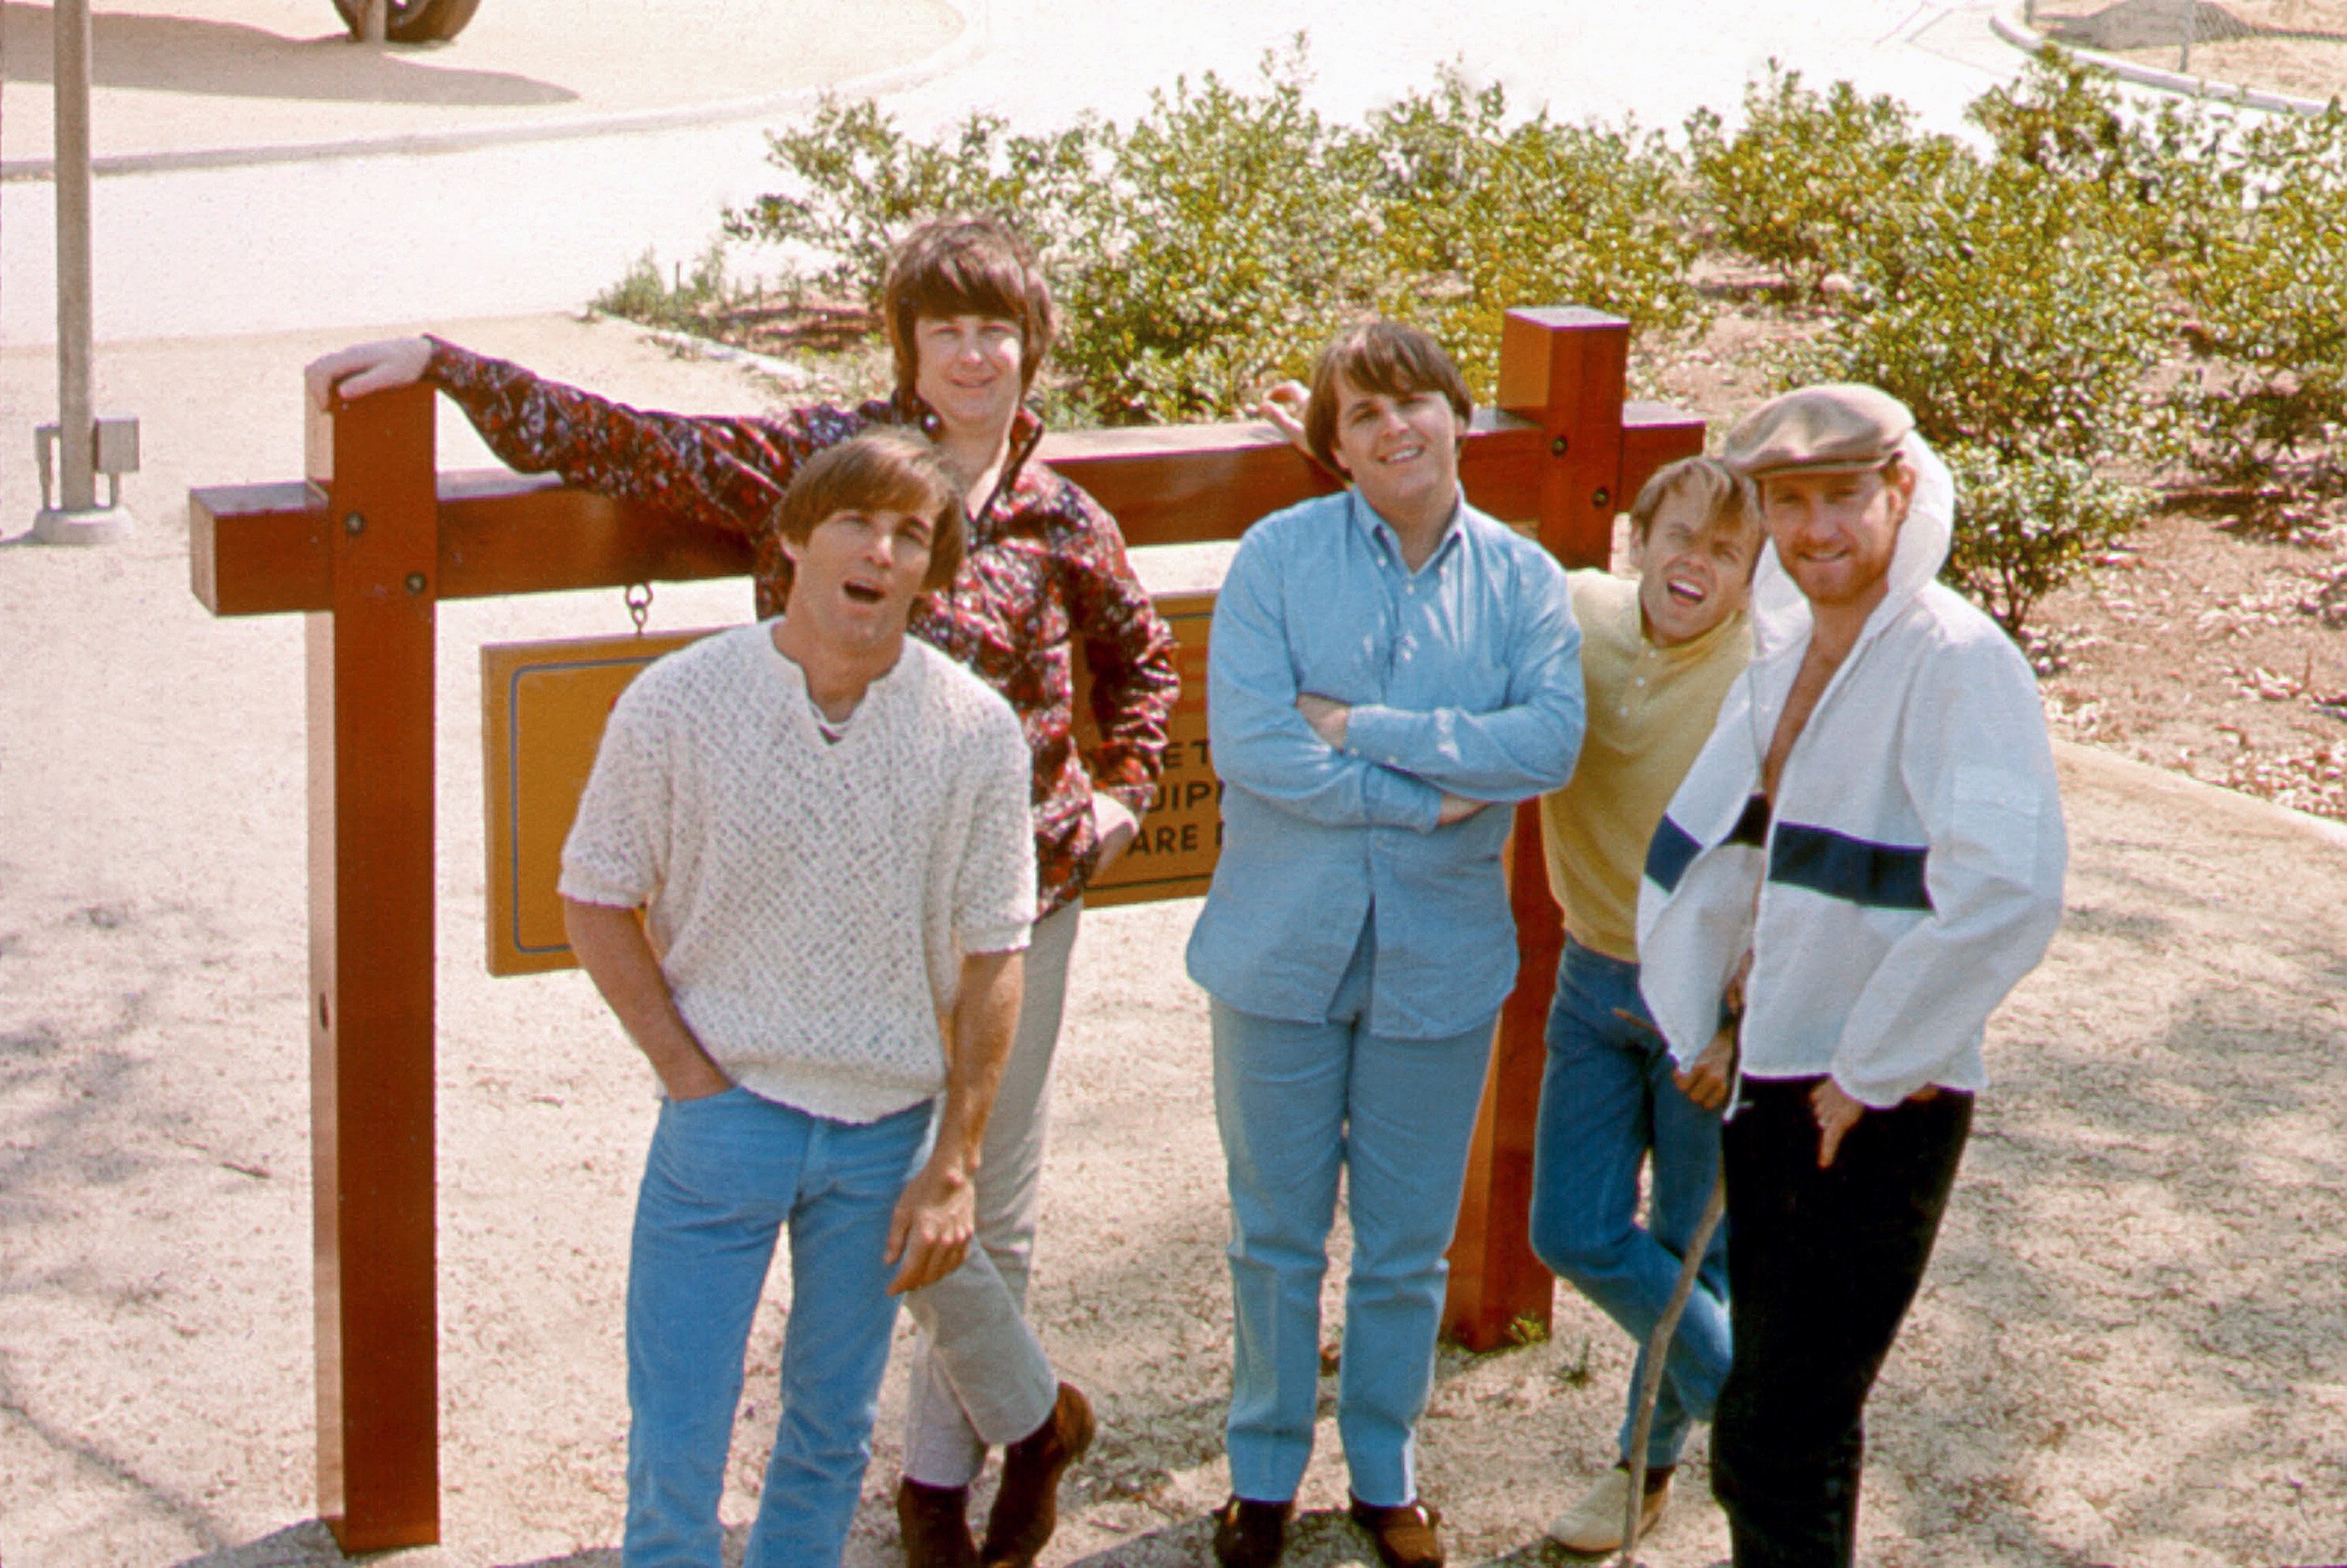 Rock and roll group The Beach Boys pose during a portrait session (Dennis Wilson, Brian Wilson, Carl Wilson, Al Jardine, Mike Love)